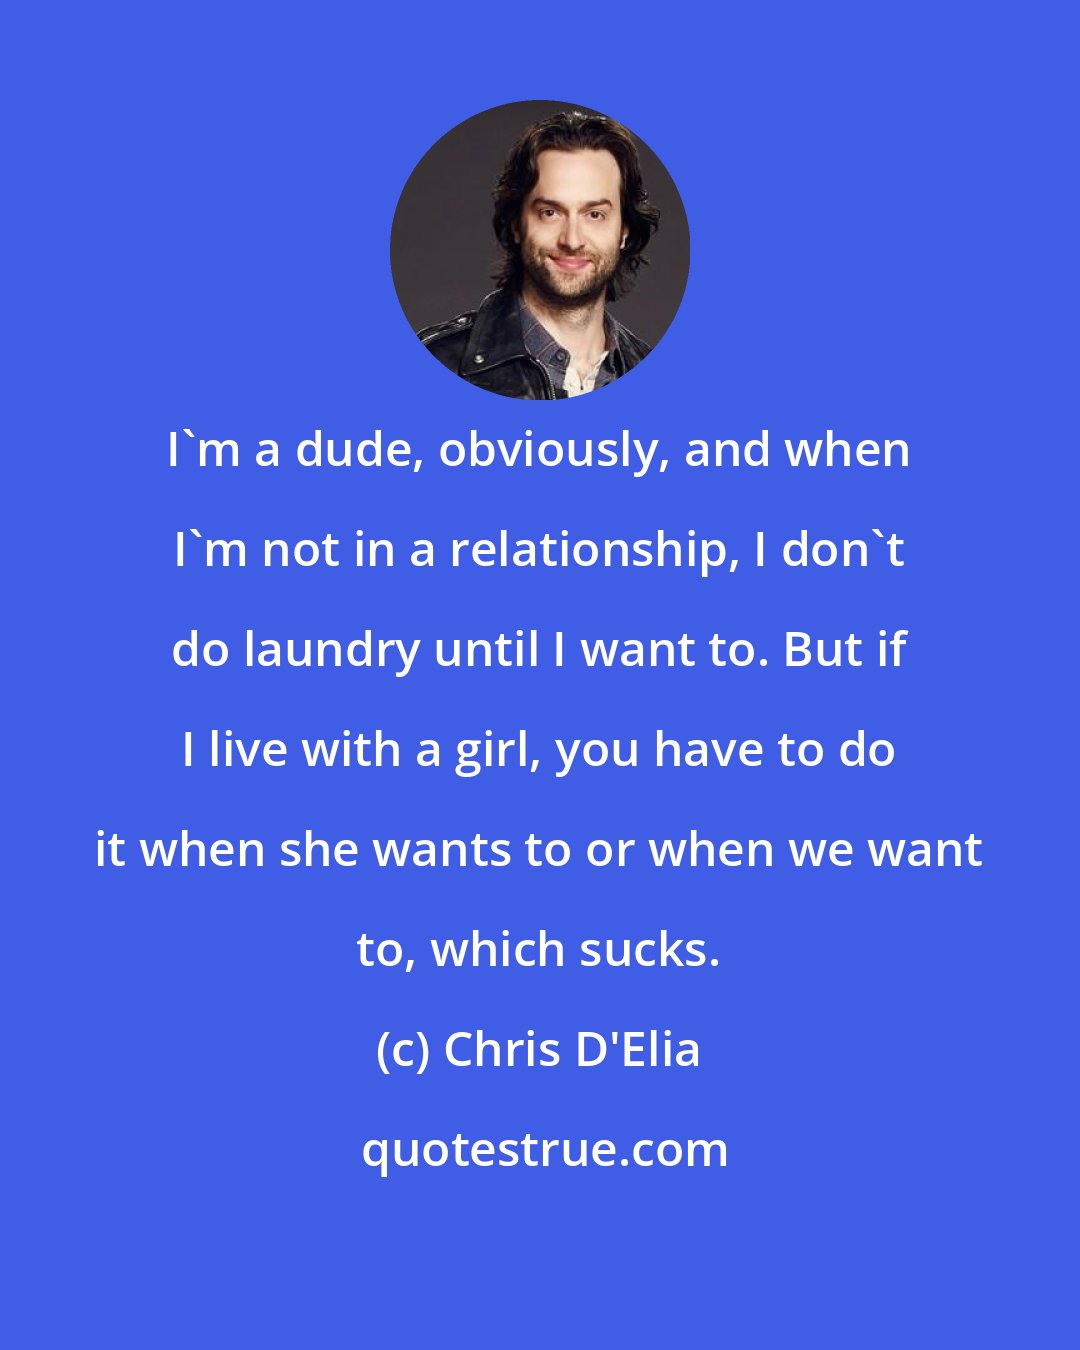 Chris D'Elia: I'm a dude, obviously, and when I'm not in a relationship, I don't do laundry until I want to. But if I live with a girl, you have to do it when she wants to or when we want to, which sucks.